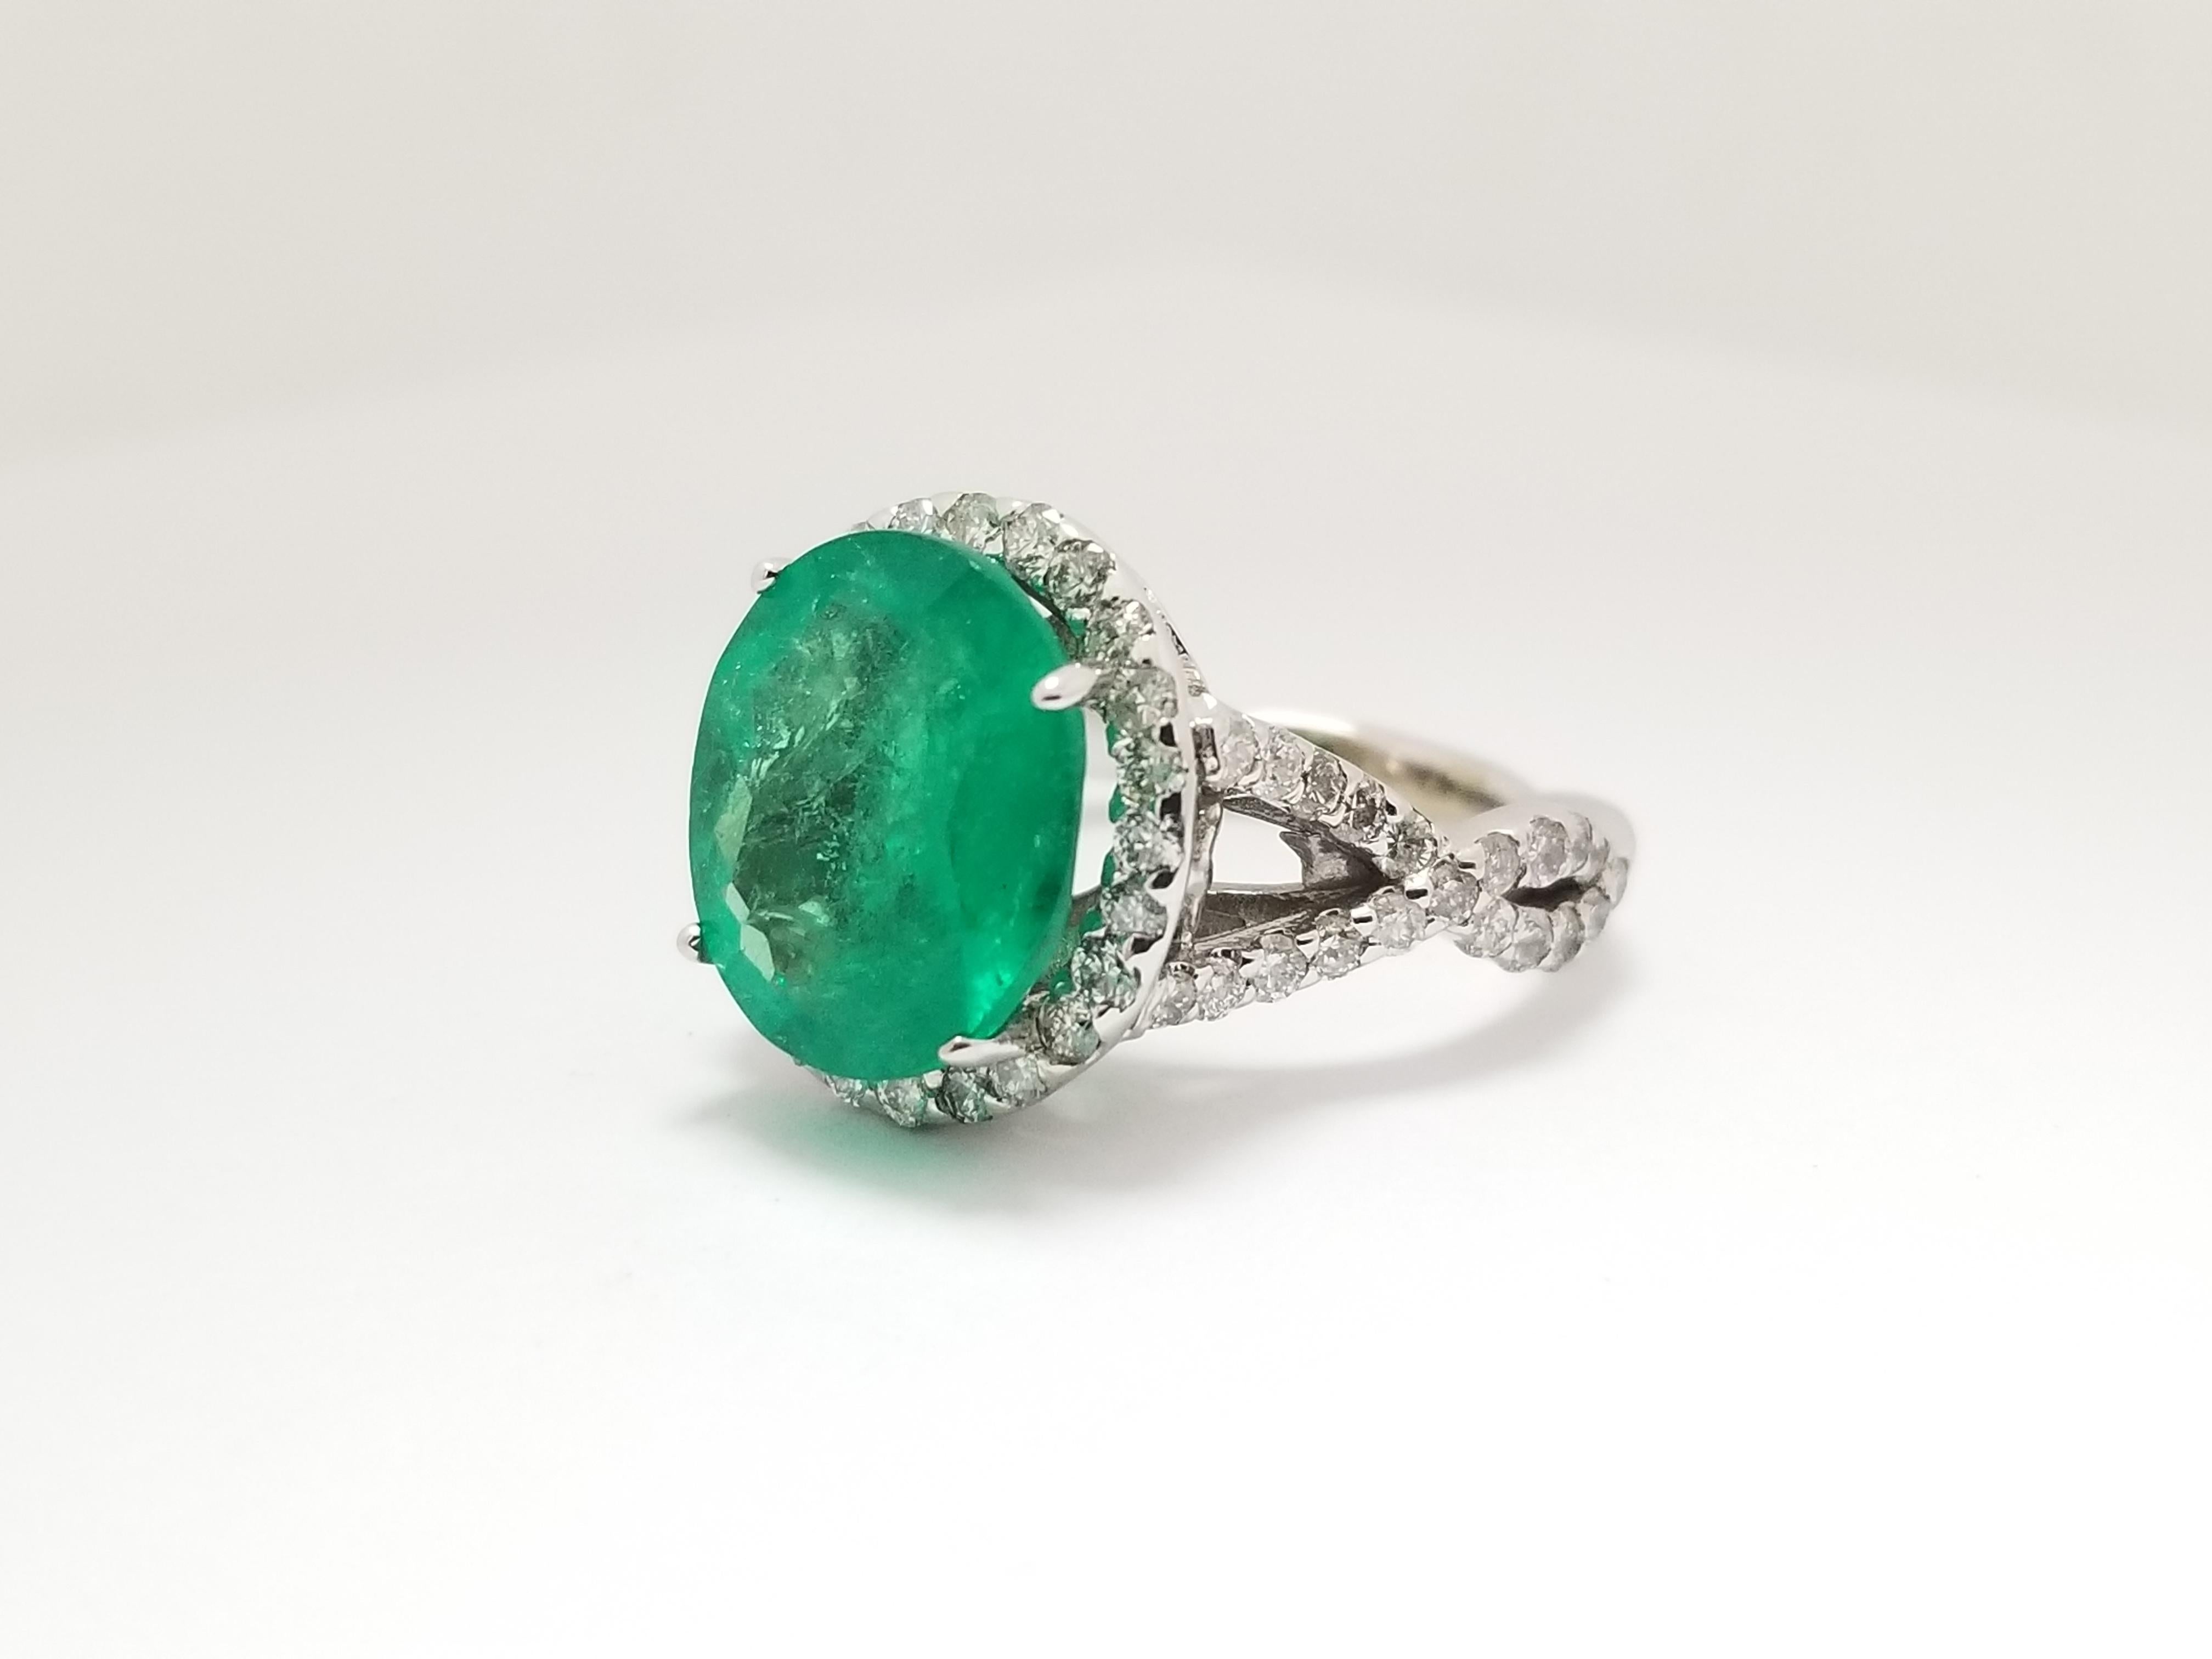 Fabulous 5.31 carats of natural beautiful color Genuine Colombian Green Emerald surrounded by 1.35 cttw of natural white diamonds in halo ring. Setting 14 Karat white gold.

5.31 CTS OVAL SHAPE GENUINE COLOMBIAM EMERALD DIAMOND RING 14K
1.35 CCTW